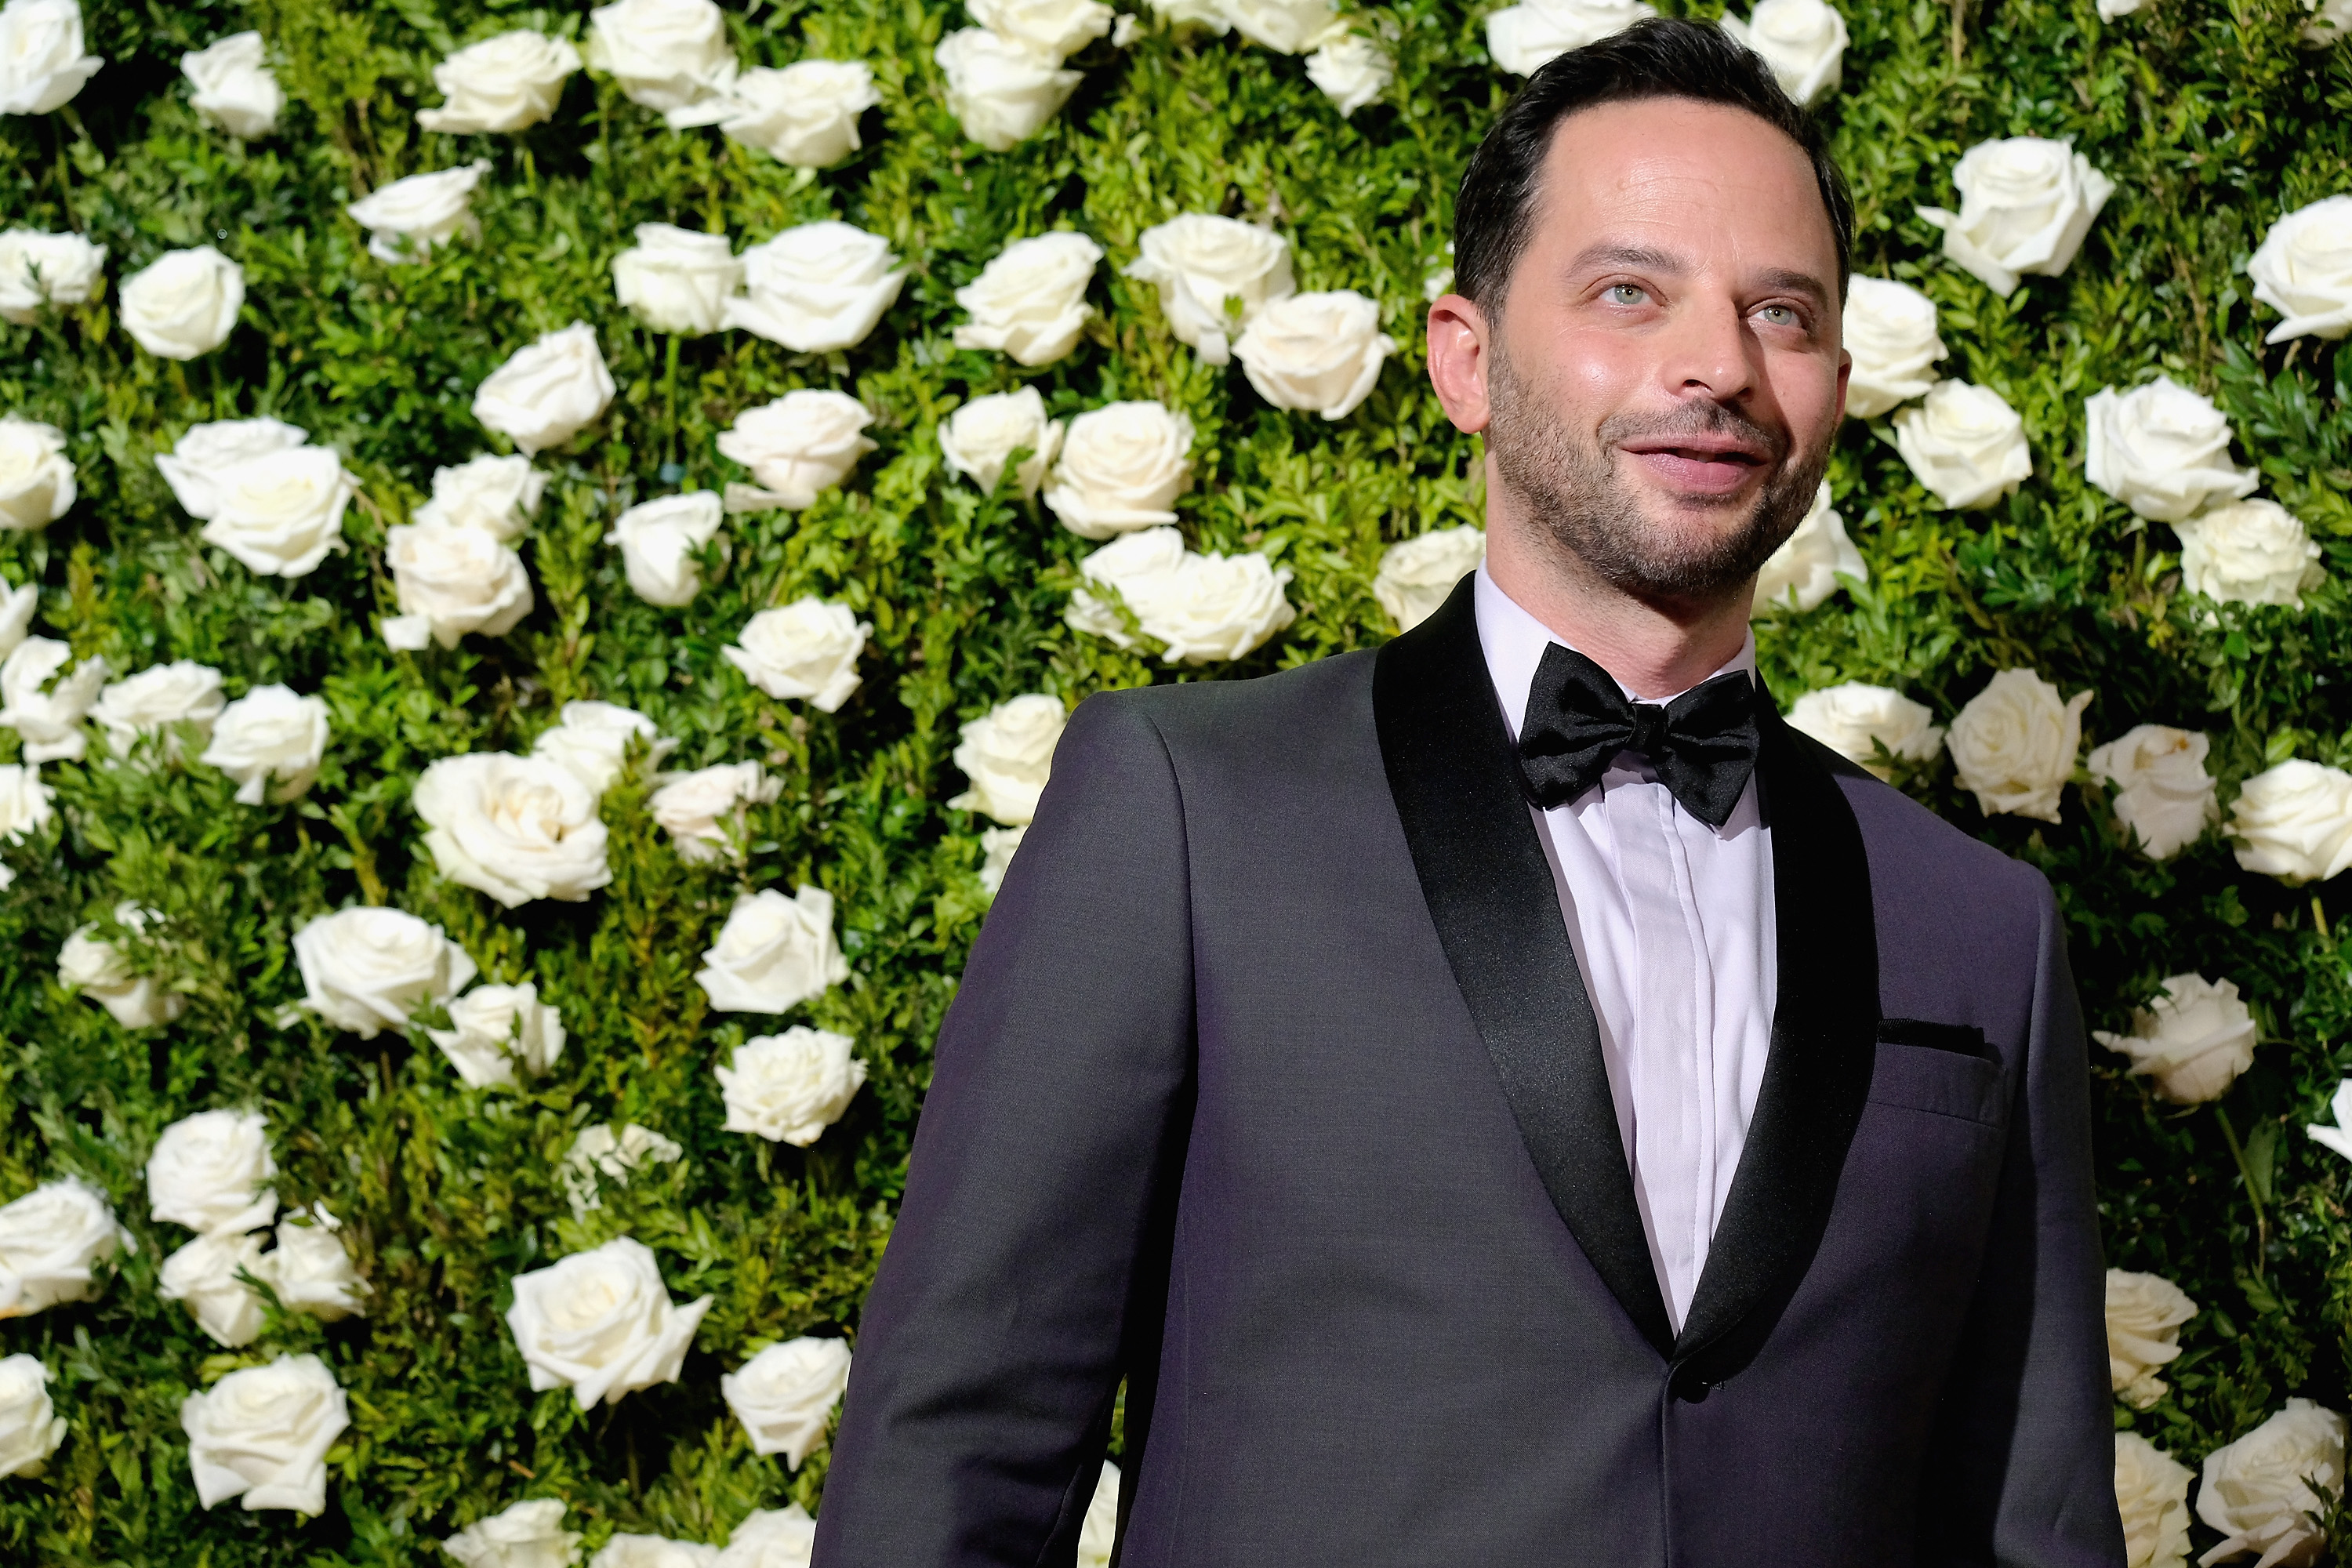 Nick Kroll attends the 2017 Tony Awards at Radio City Music Hall on June 11, 2017 in New York City. (Jemal Countess—Getty Images for Tony Awards Productions)